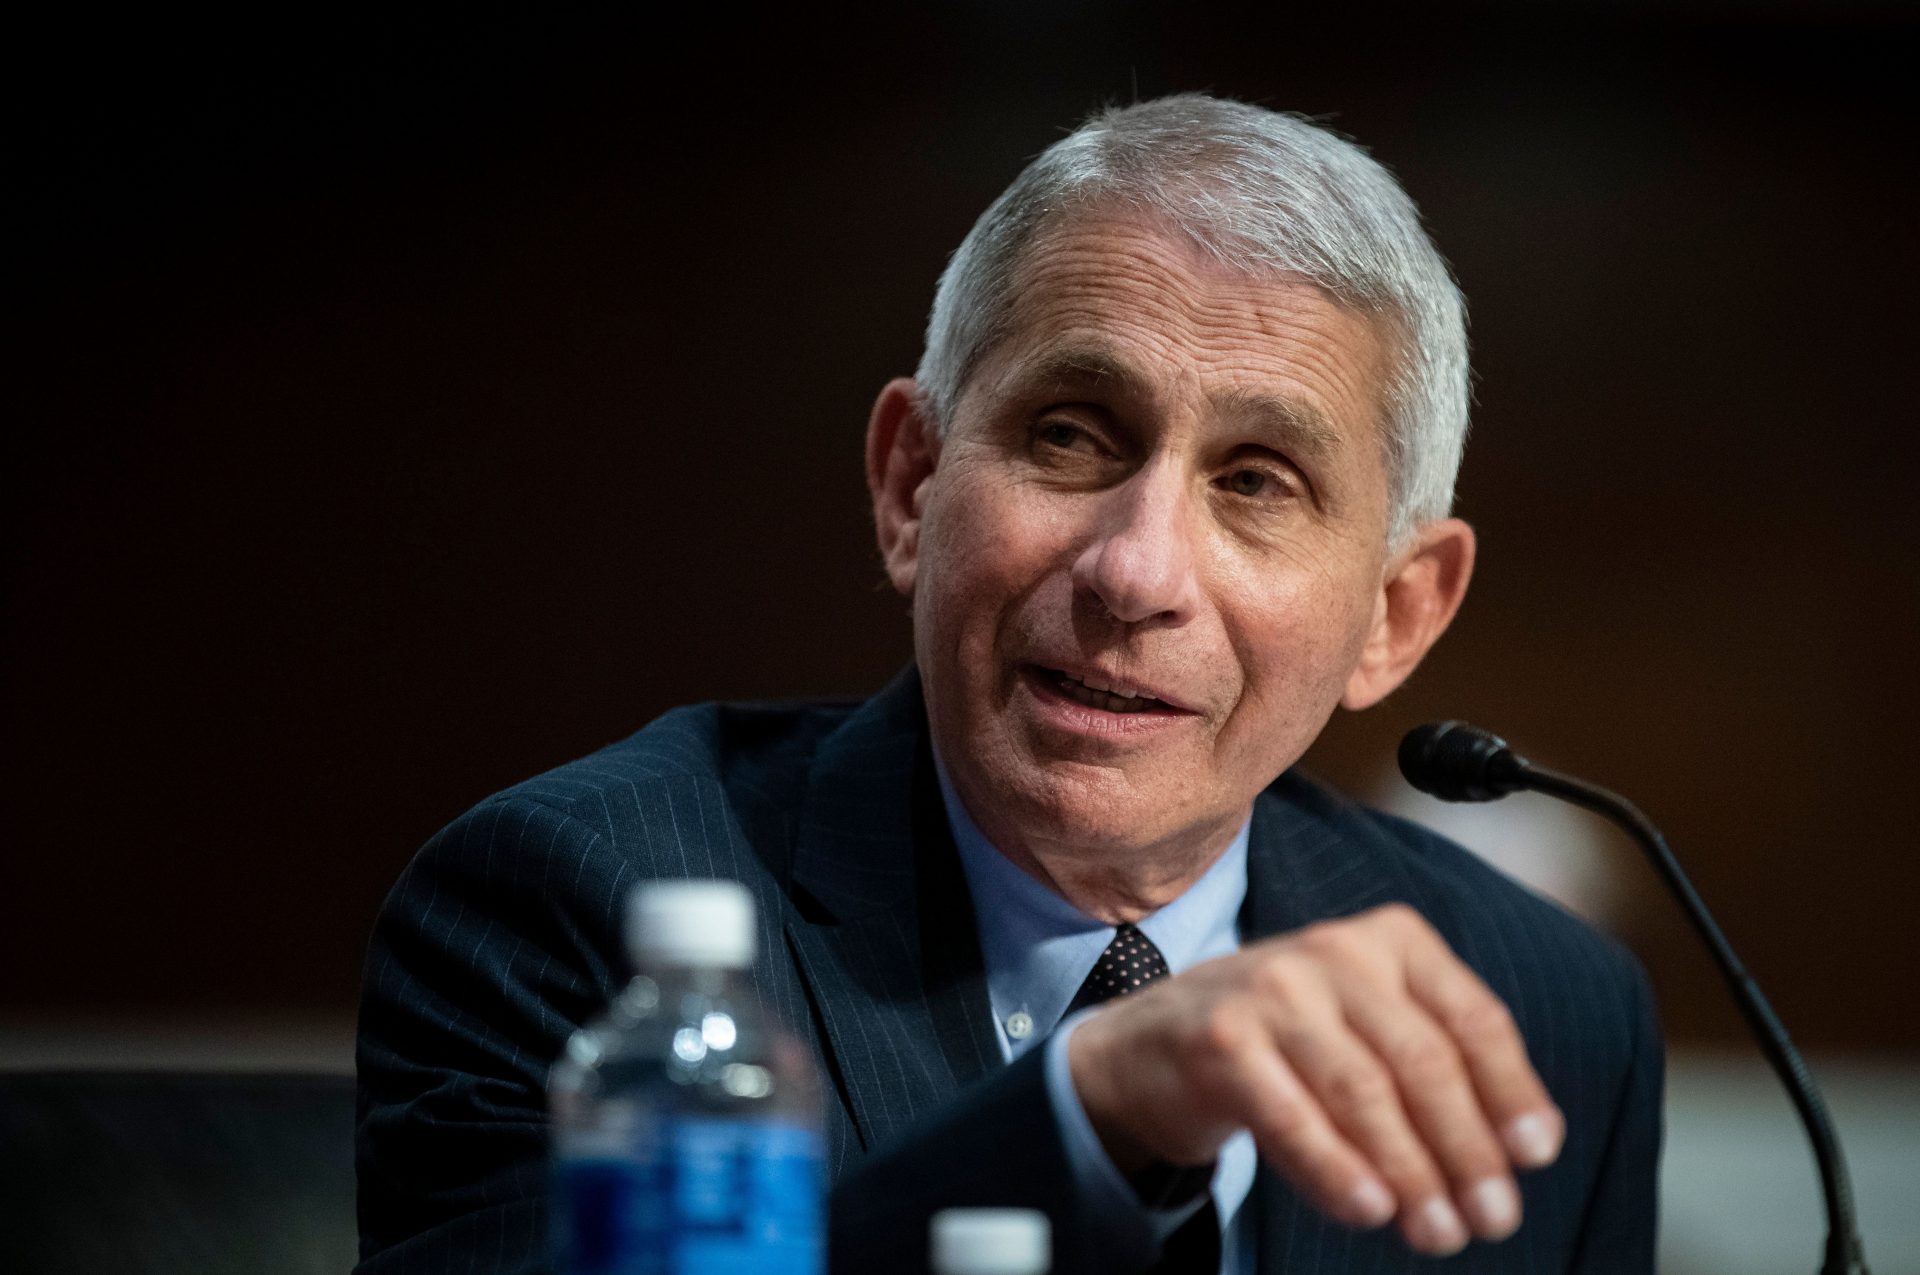 Dr. Anthony Fauci, director of the National Institute of Allergy and Infectious Diseases, has testified before Congress on the spread of the novel coronavirus.